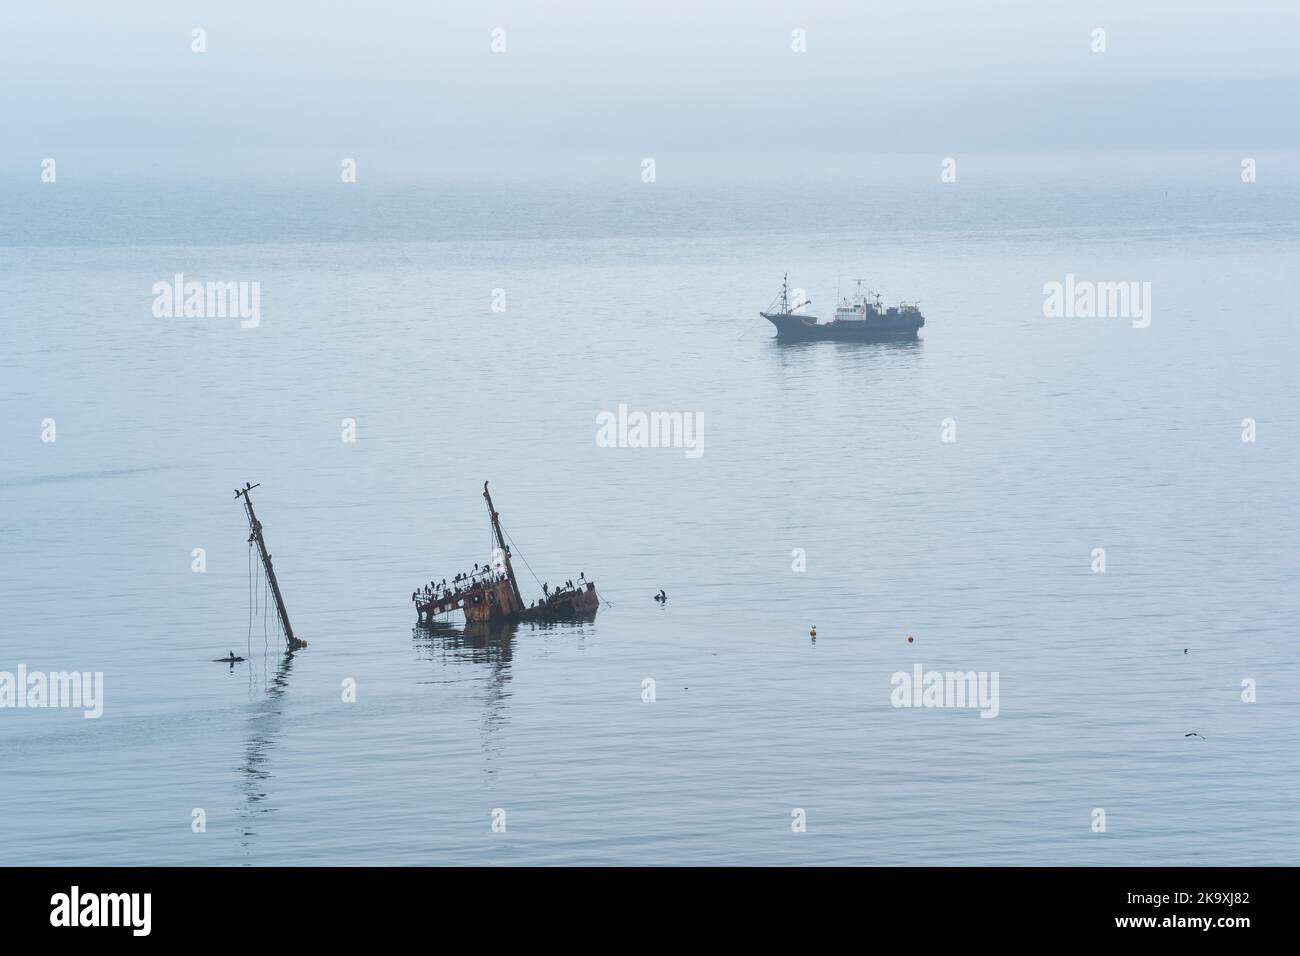 fishing ship and sunken shipwreck at sea against the background of a distant foggy coast Stock Photo